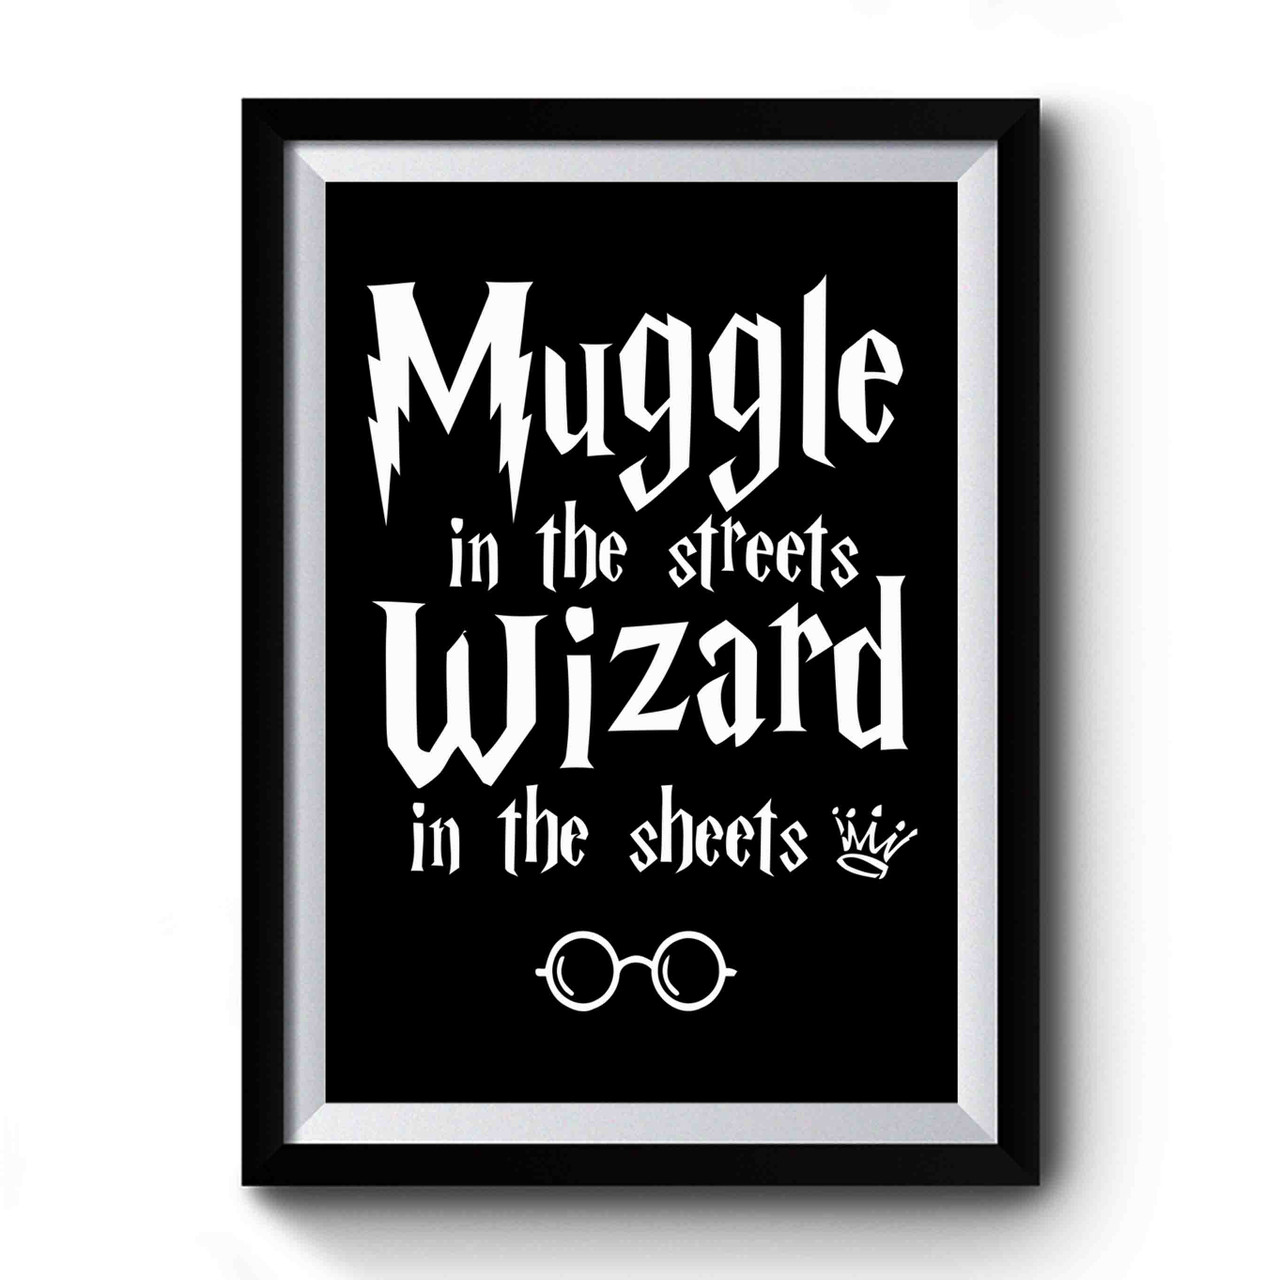 Don't Let The Muggles Get You Down | Harry Potter Wall Decal Home Decor  Stencil